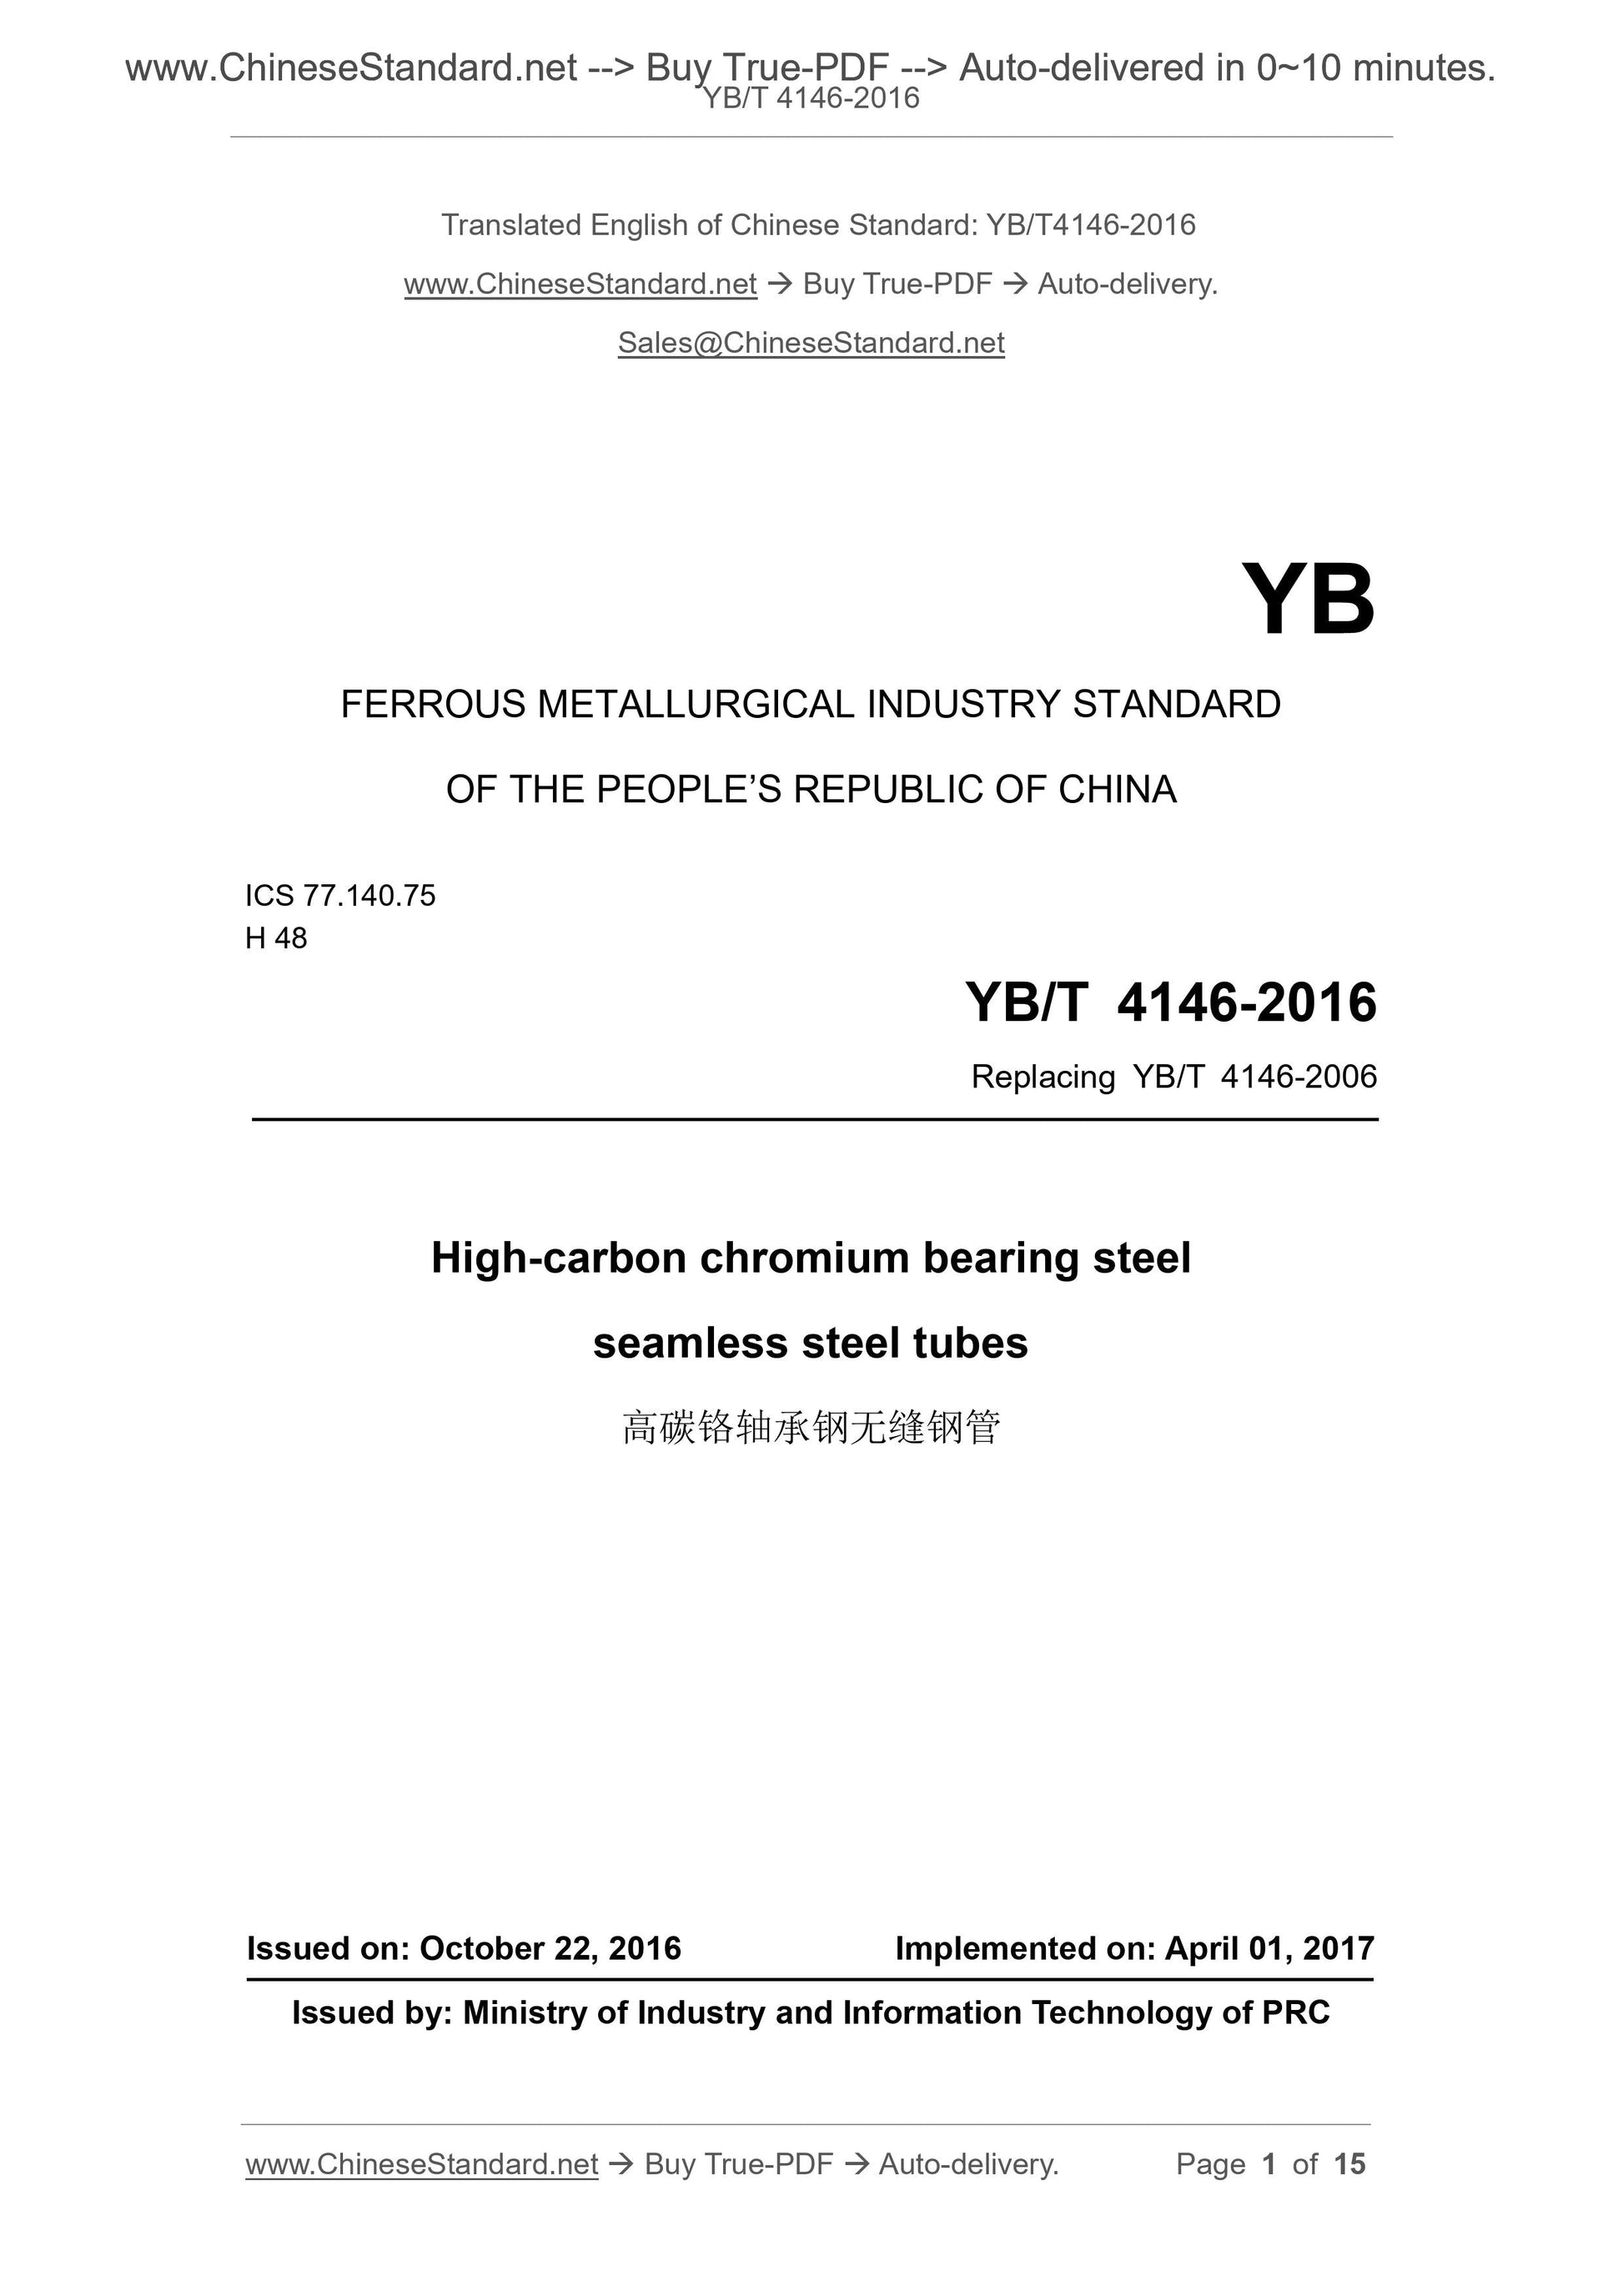 YB/T 4146-2016 Page 1